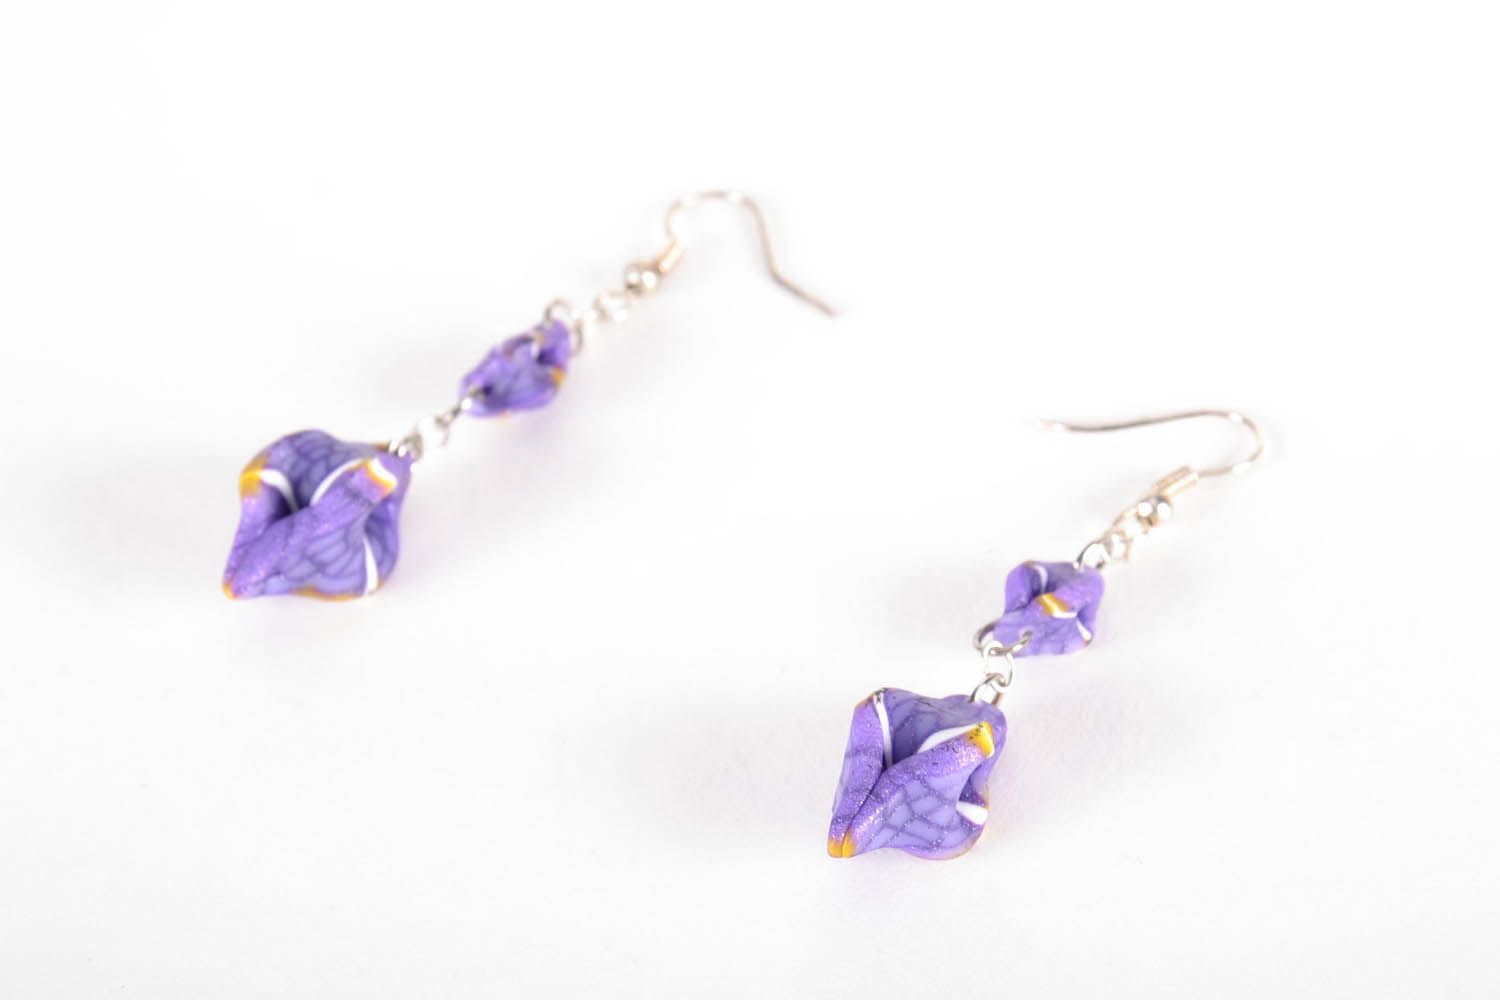 Violet earrings made of polymer clay photo 1